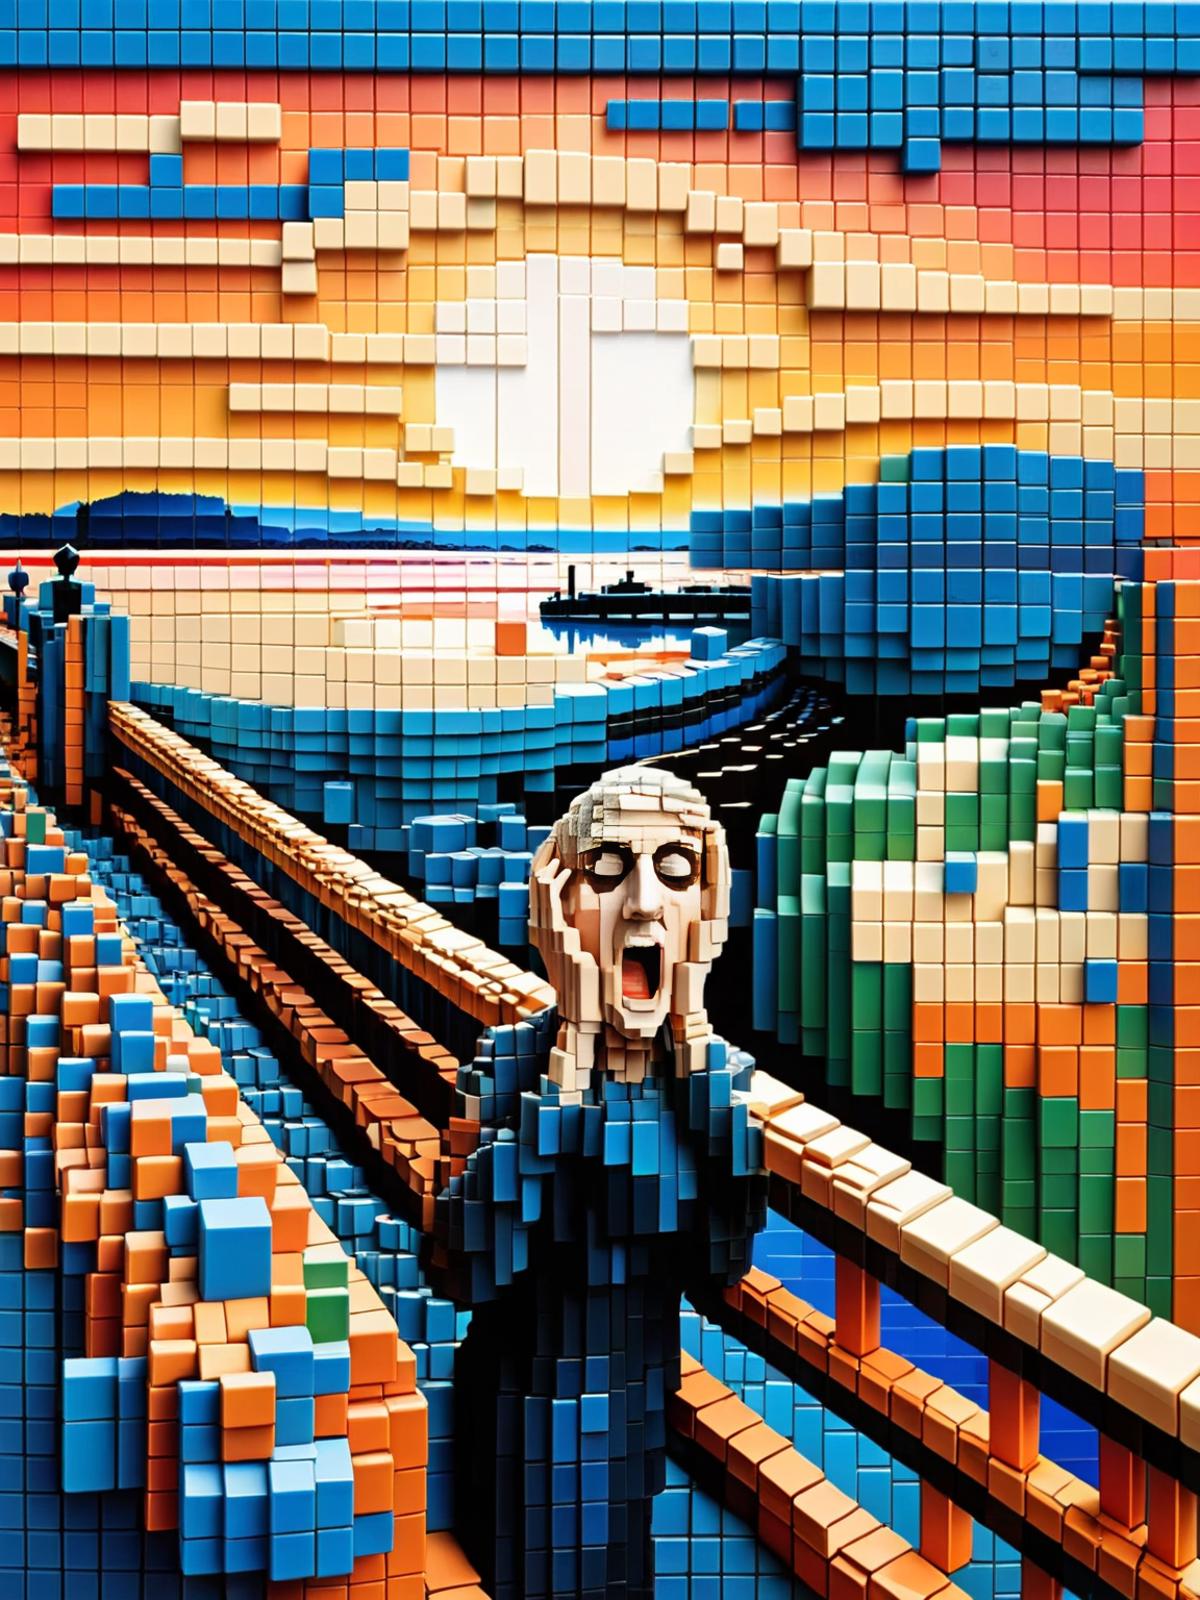 A LEGO sculpture of a person screaming at a painting of a sunset and water.